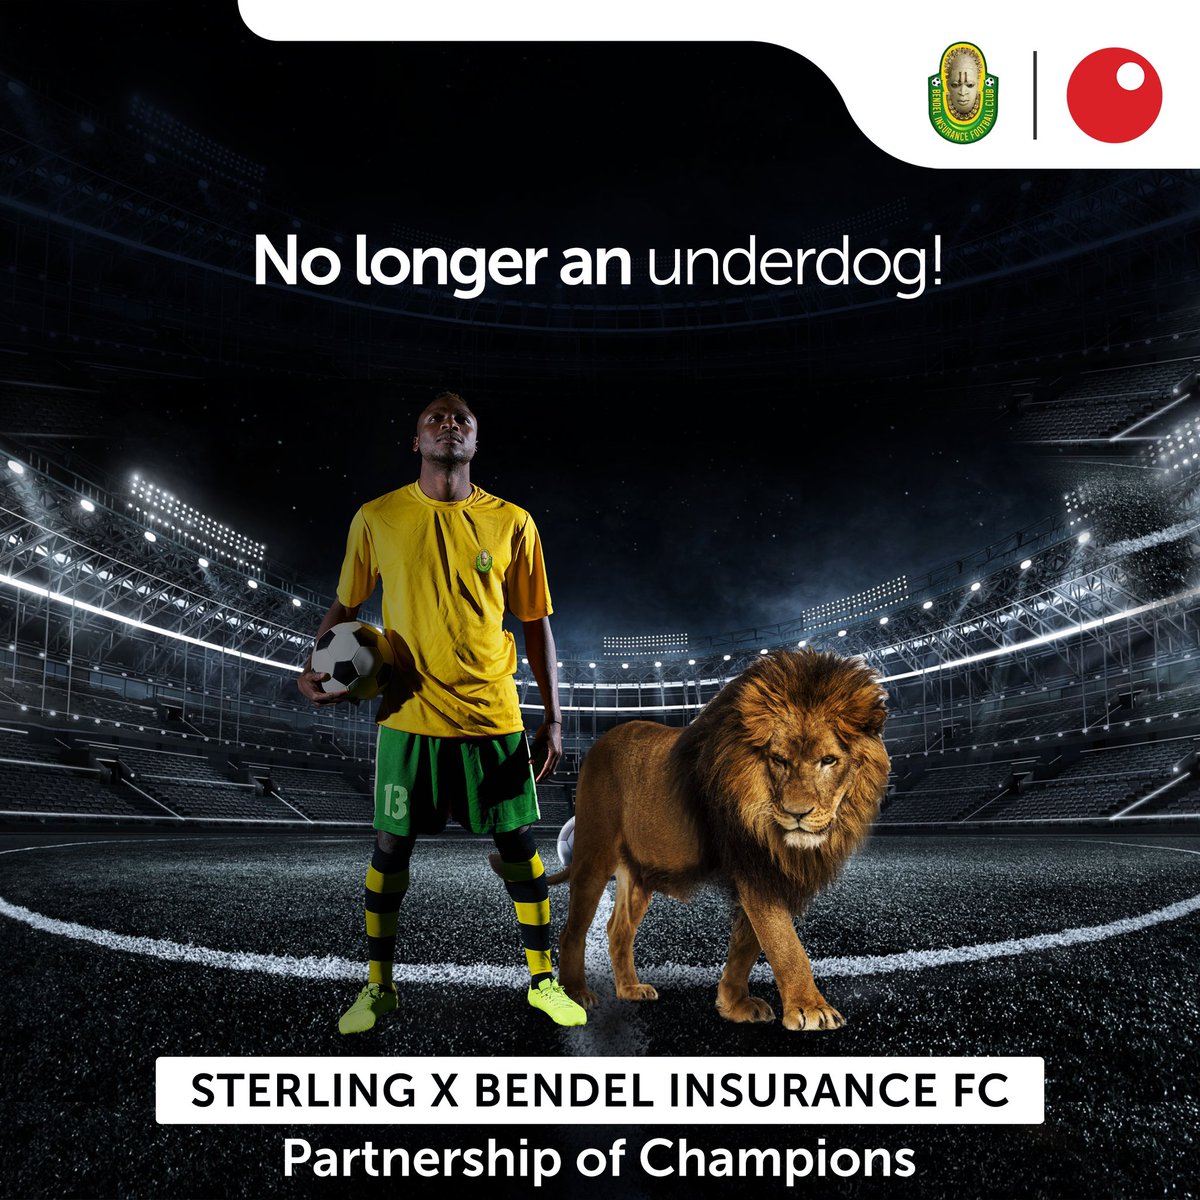 Only those who know the pain of discipline can taste sweet victory.

We’ve put in the work and have formed a great alliance. Now, we will surmount the odds.

#BendelInsuranceFC #Football #Sports #SterlingXBendelInsurance